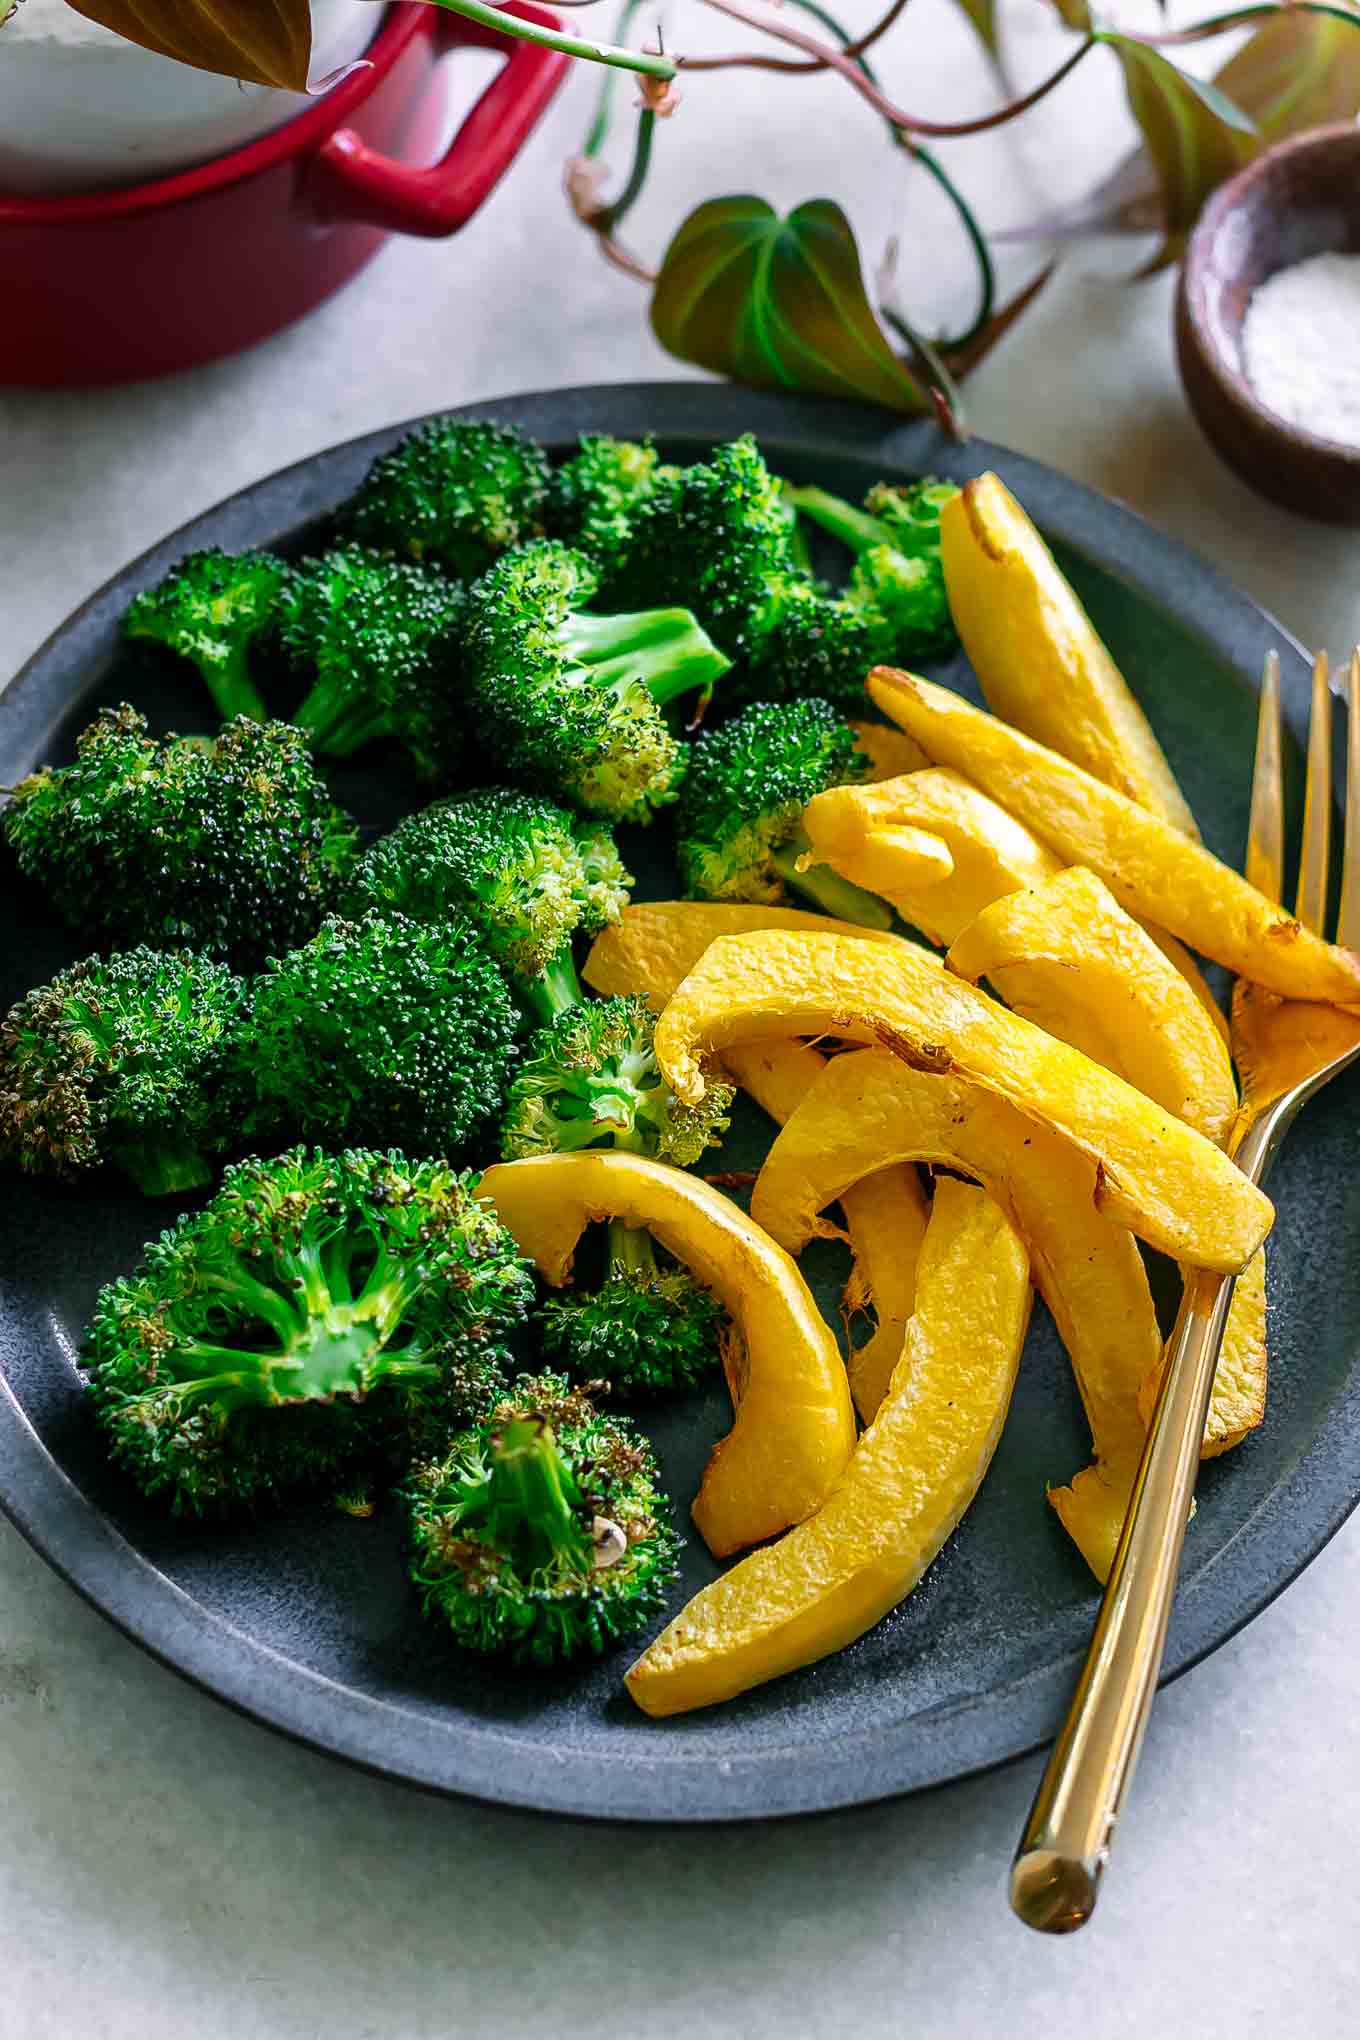 baked acorn squash and broccoli side dish on a white table